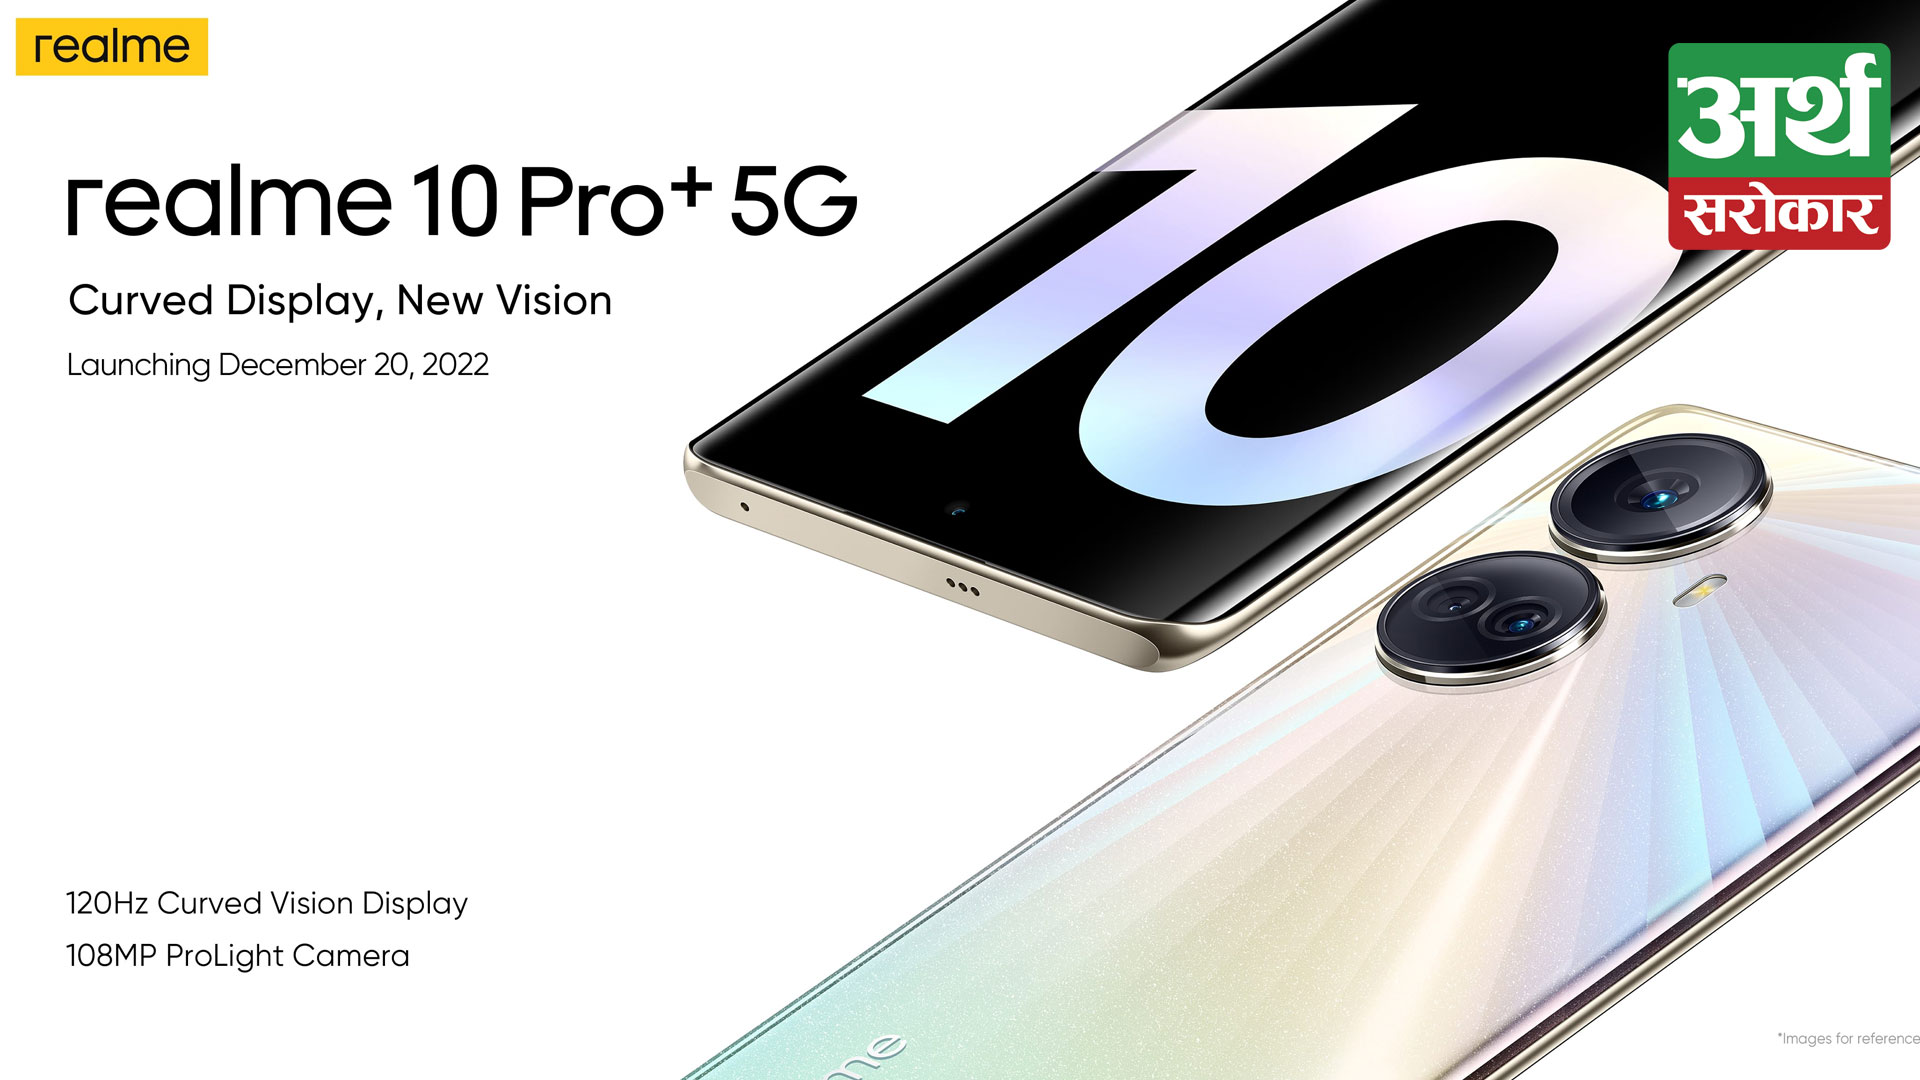 The most hyped smartphone of 2022, realme 10 Pro+ 5G is coming soon to Nepal